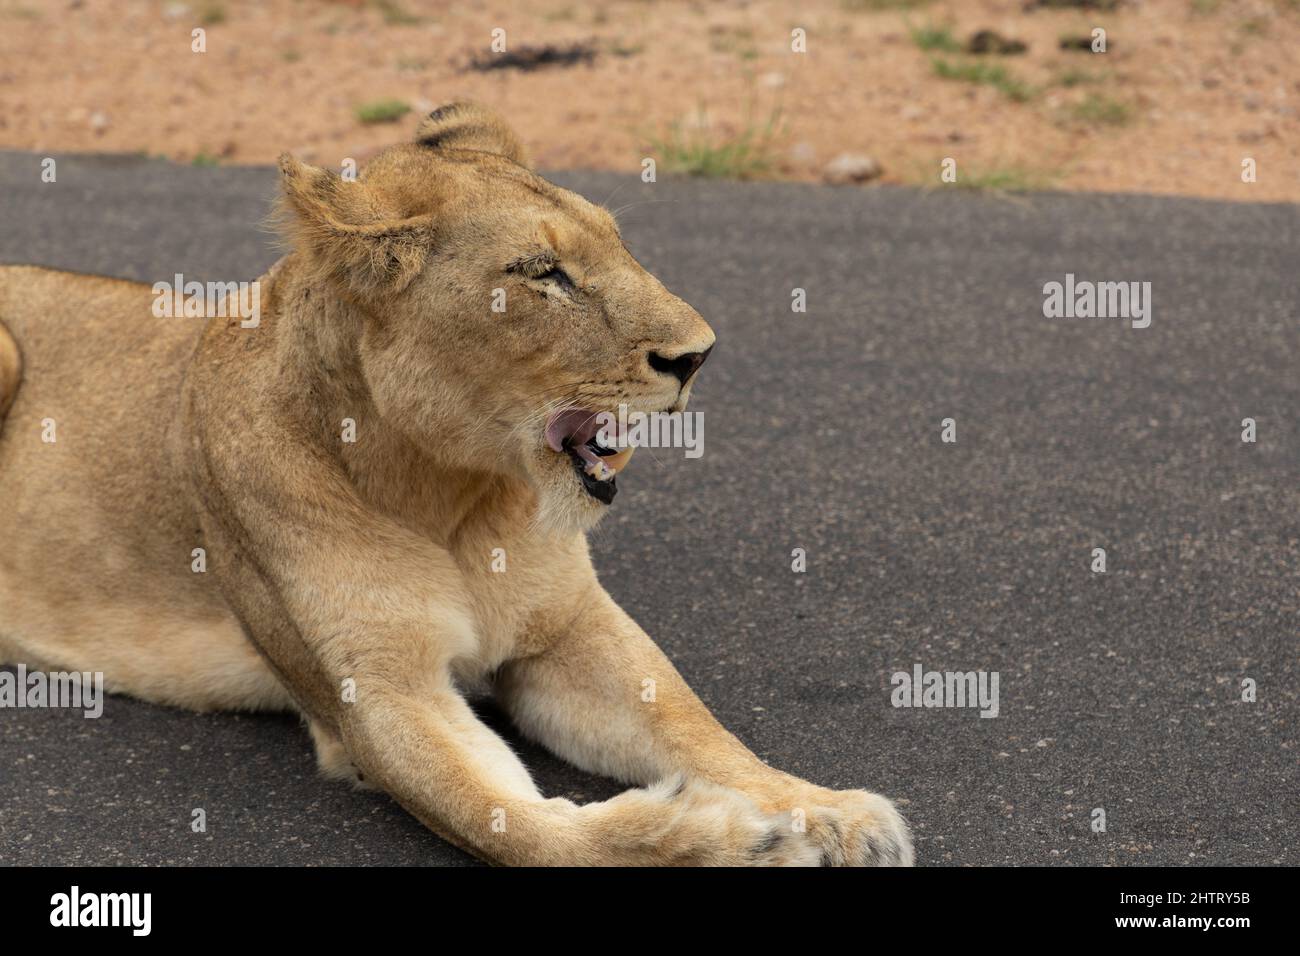 Close up on a lioness lying on a tarred road in the Kruger National Park in South Africa Stock Photo